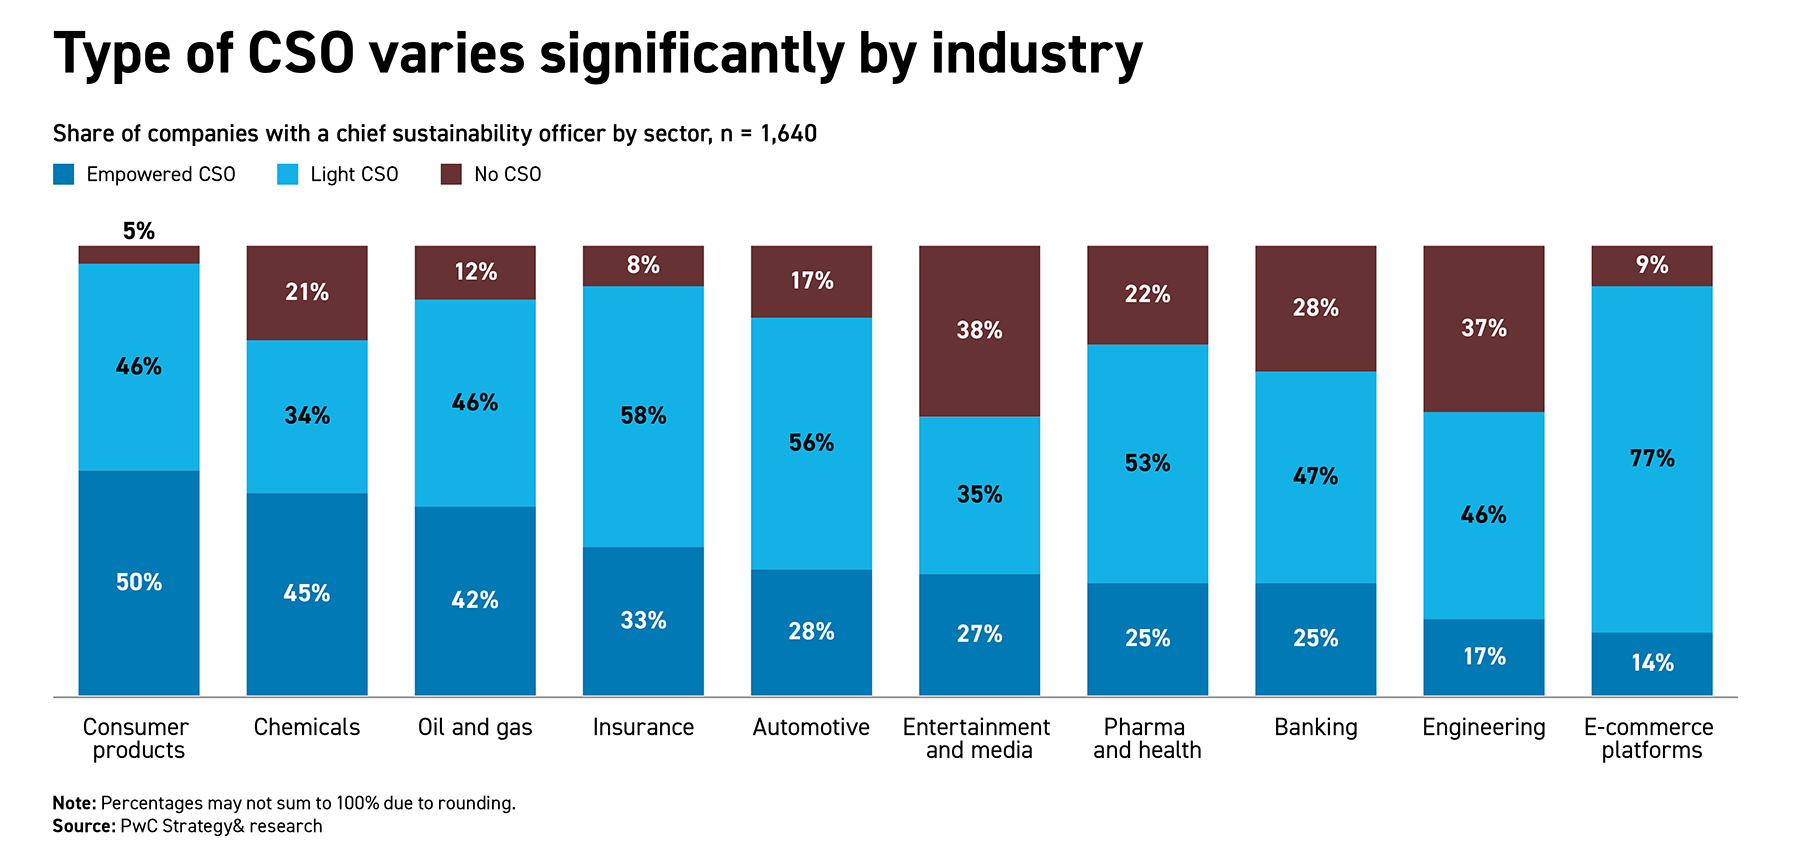 Bar chart showing the share of companies with a chief sustainability officer by sector.